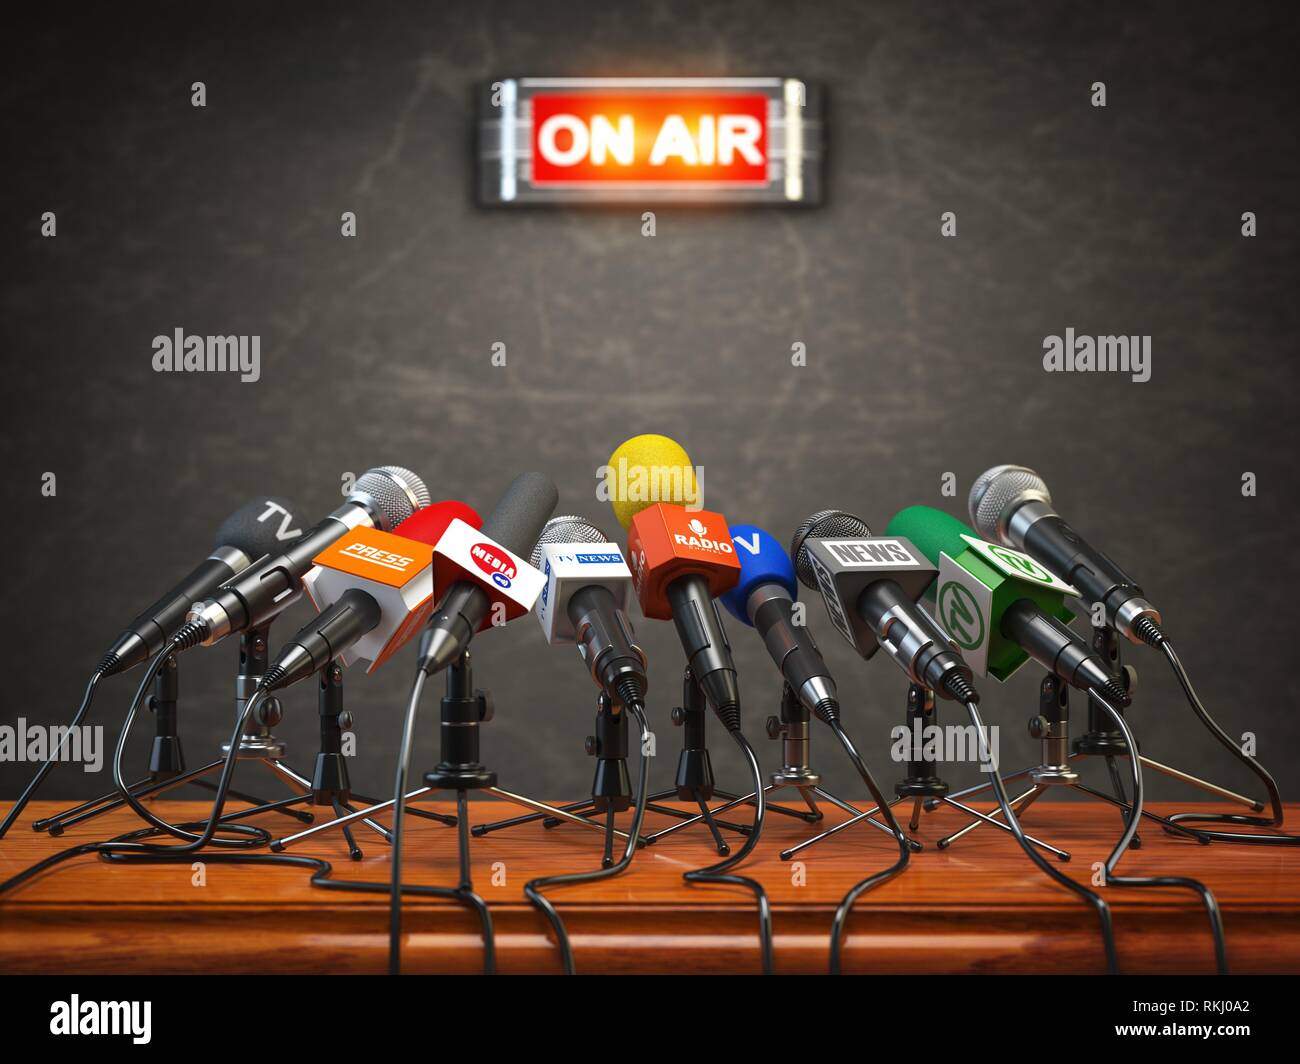 Press conference or interview on air. Microphones of different mass media, radio, tv and press prepared for conference meeting. 3d illustration. Stock Photo